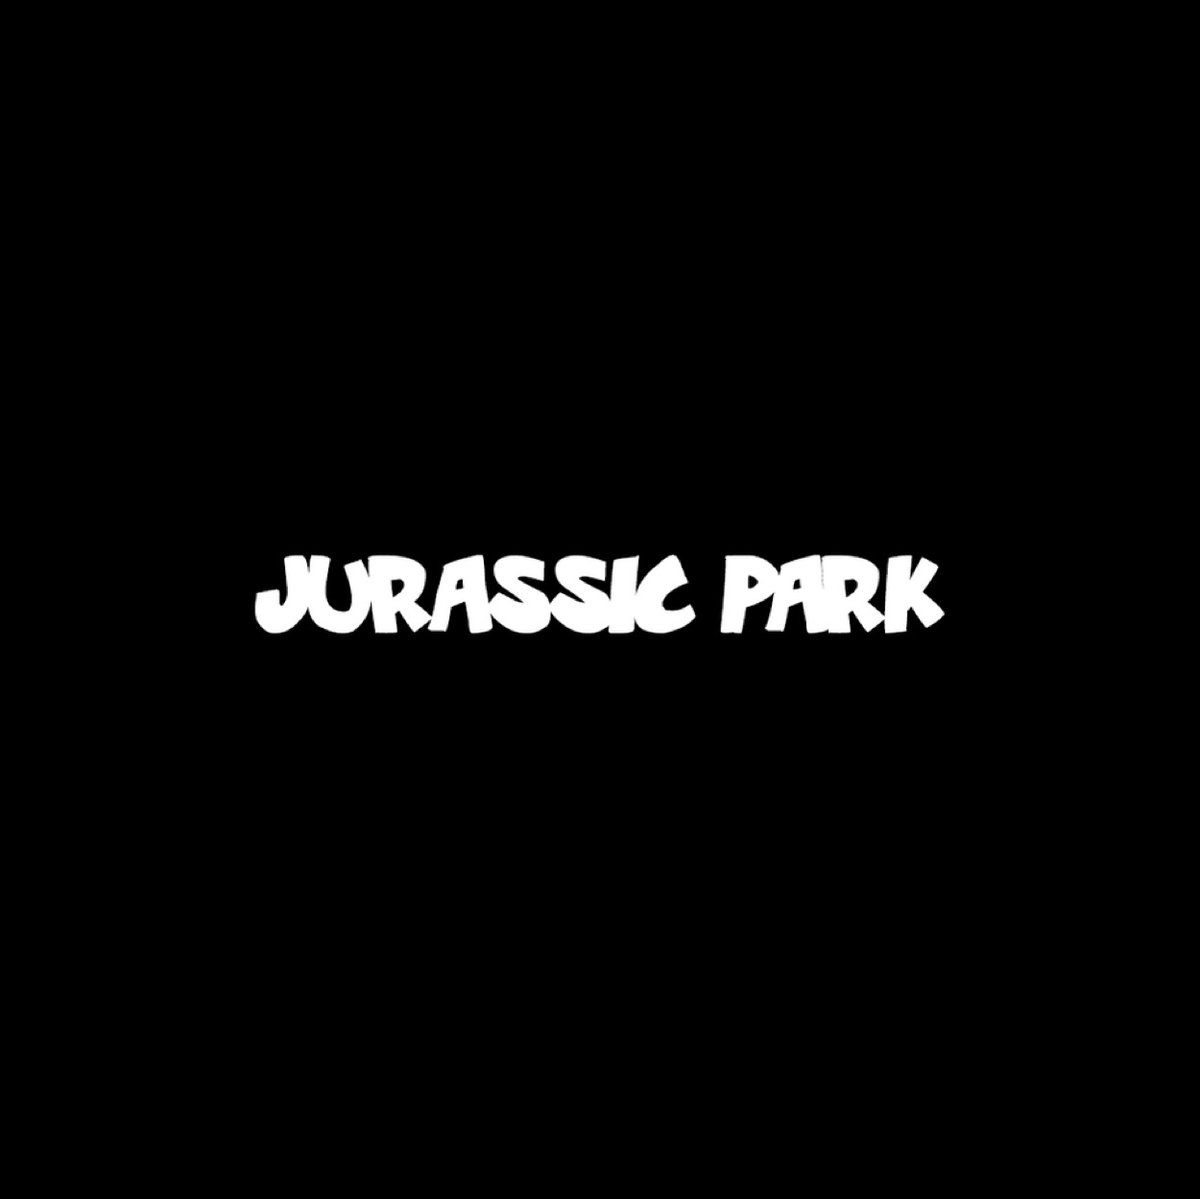 Next is Jurassic Park, the wonderfully futuristic look at how leathery old Dinosaurs could ruin the Earth, I mean that couldn't happen right??